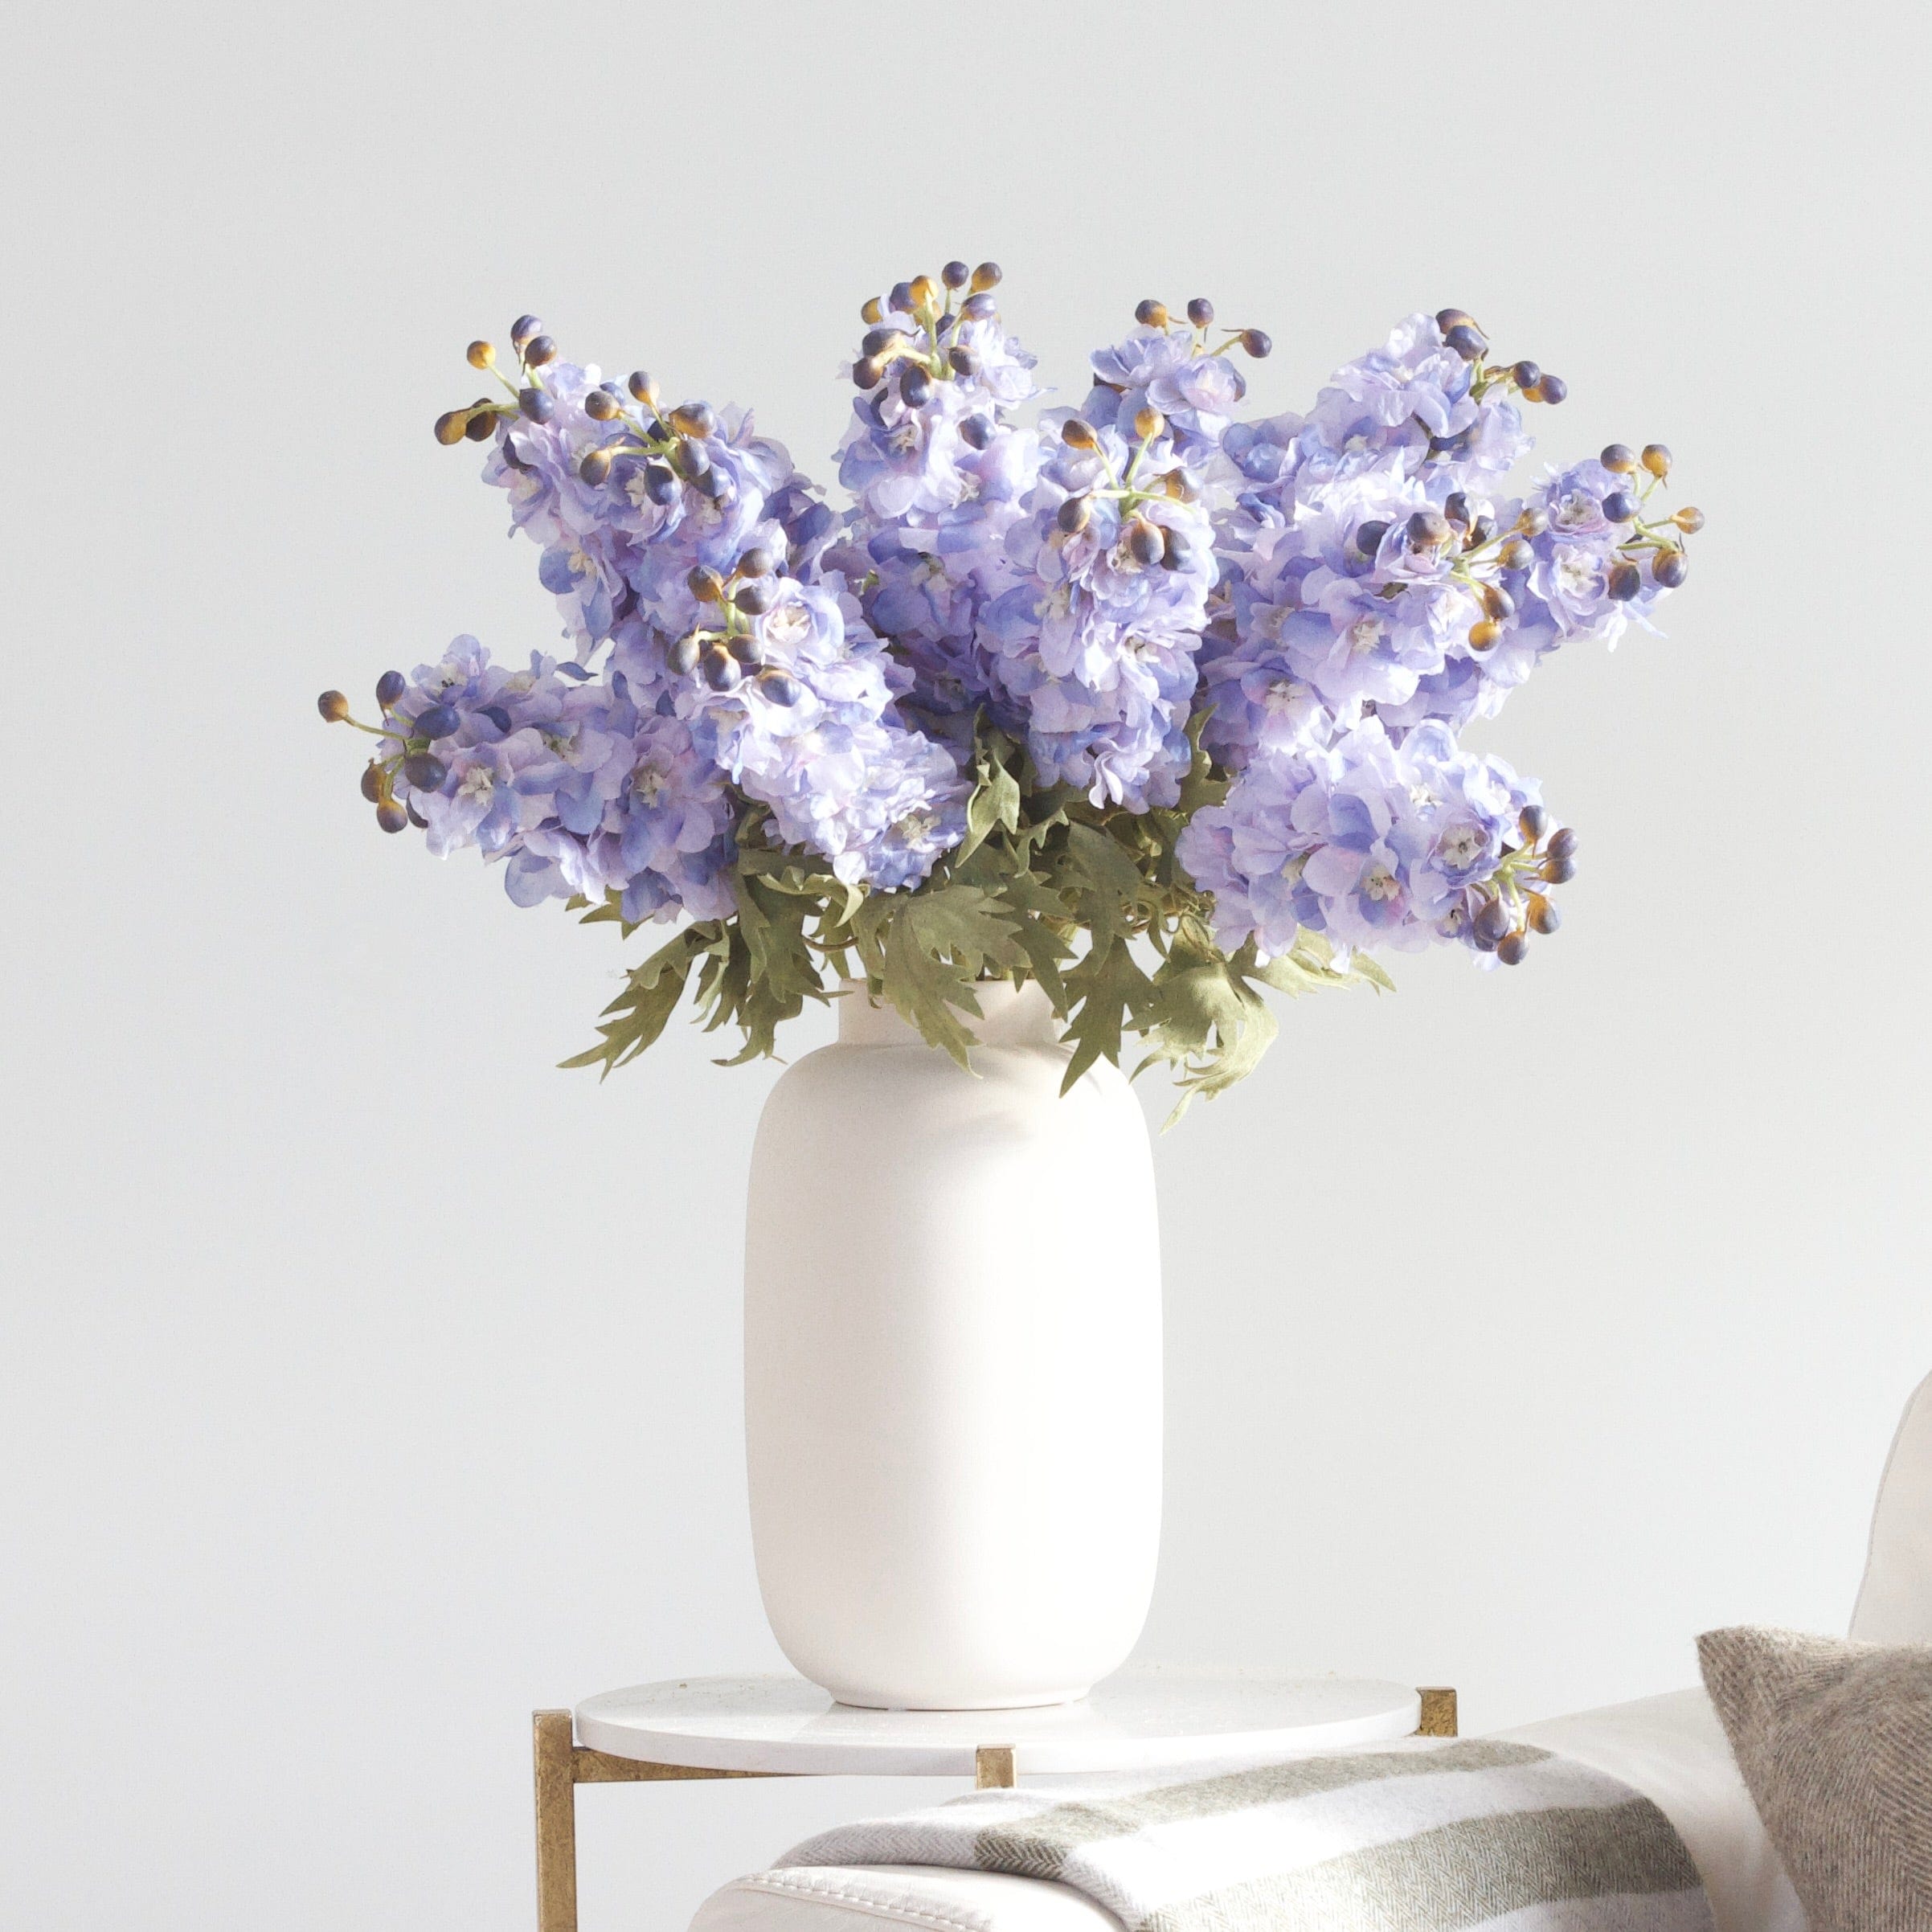 Luxury Lifelike Realistic Artificial Fabric Silk Blooms with Foliage Buy Online from The Faux Flower Company | 12 stems of Blue Delphinium ABX2339BL styled in Kingham Vase ABP04B3